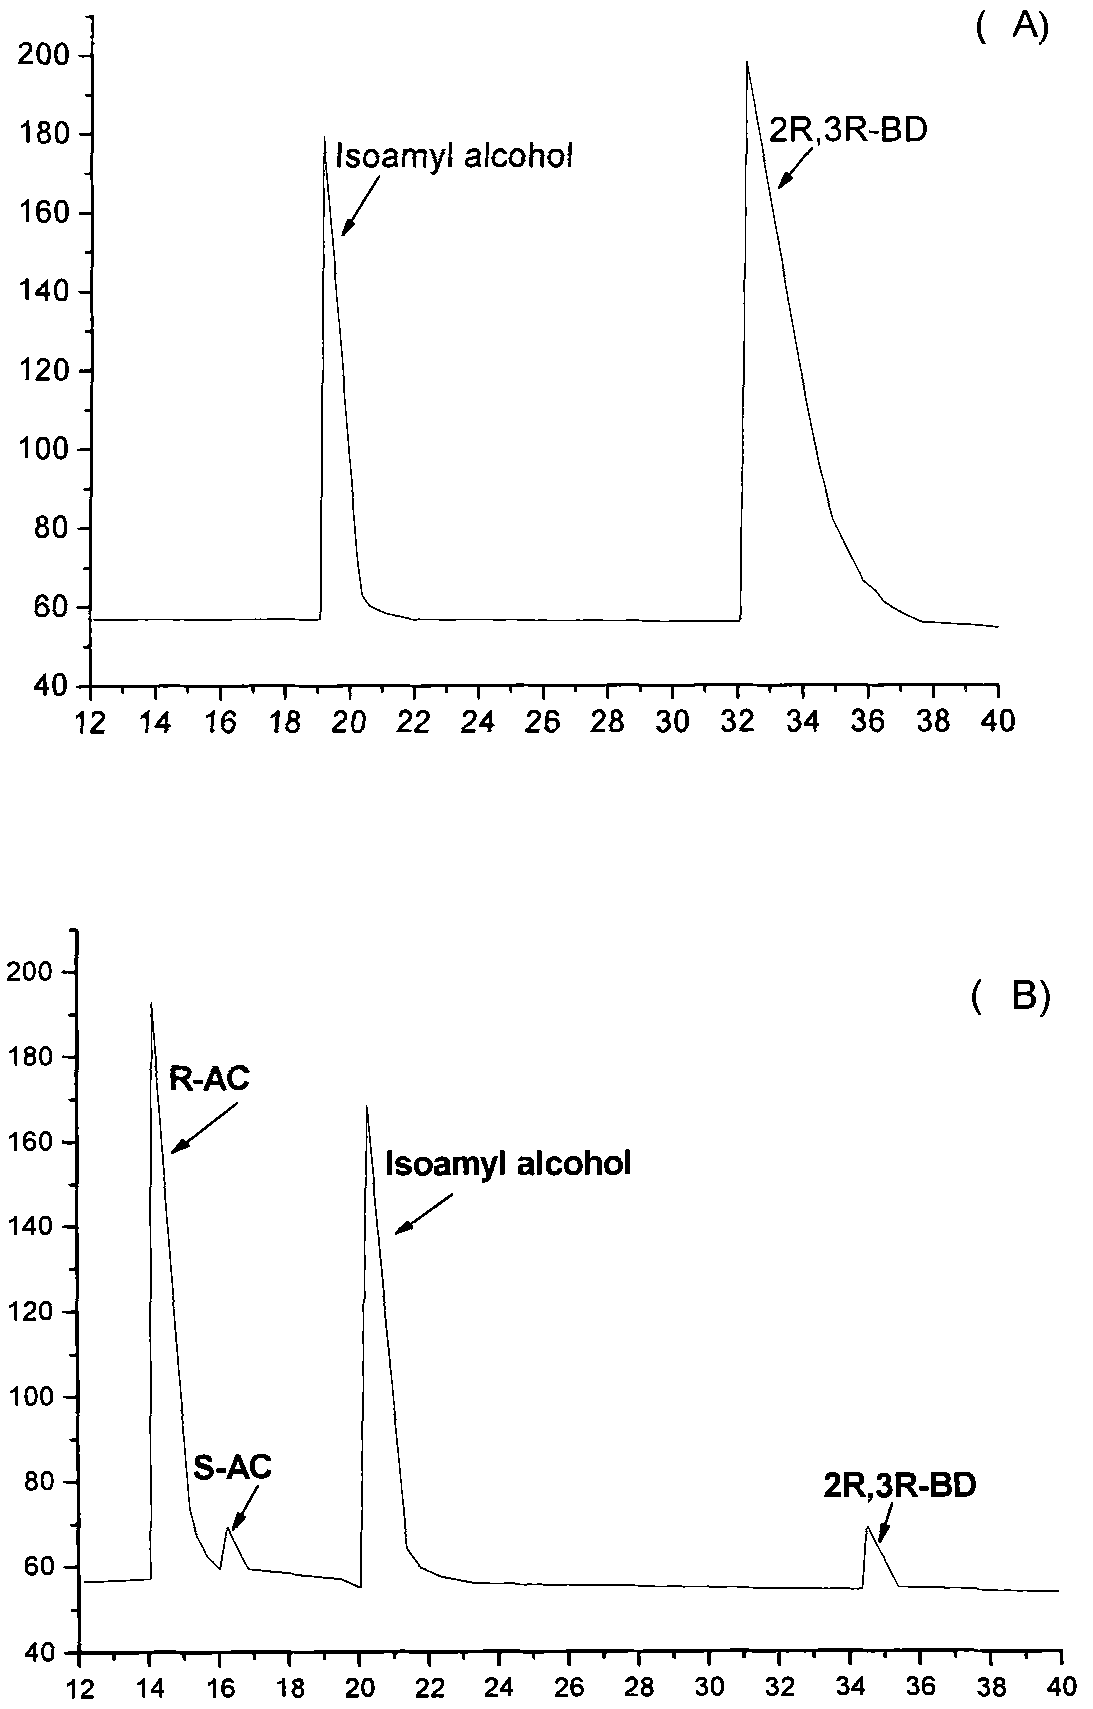 Gene recombination bacterium and application thereof in preparing chiral pure acetoin and 2,3-butanediol